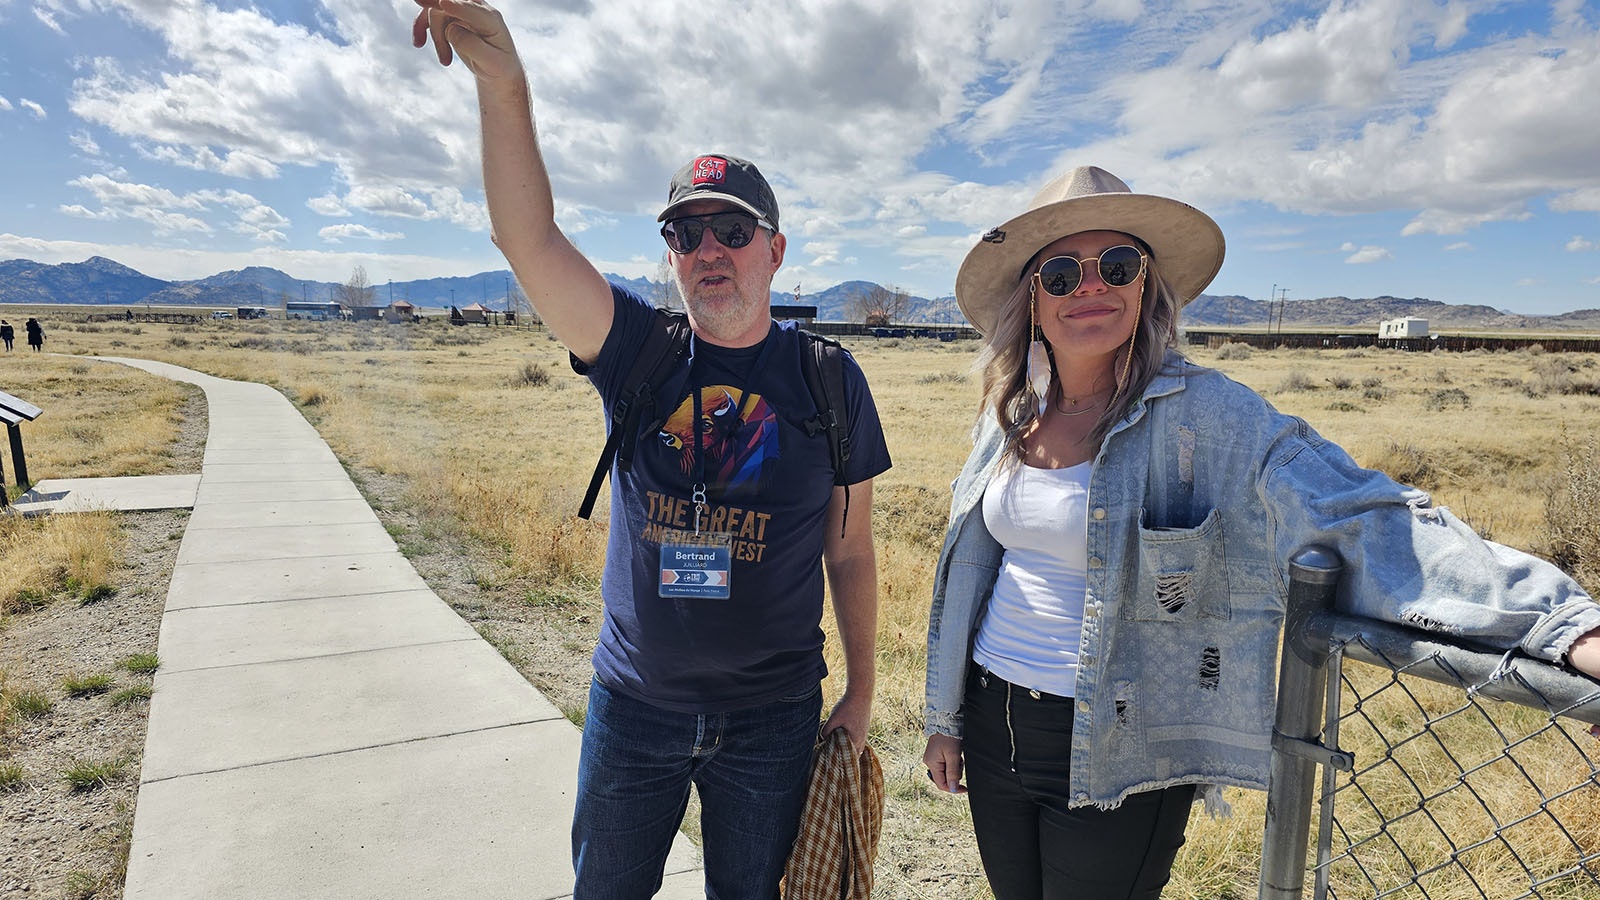 Bertrand Juilliard with Les Ateliers Du Voyage tells Visit Cheyenne's Amanda Sewell he will remember his trip to Independence Rock for the rest of his life.